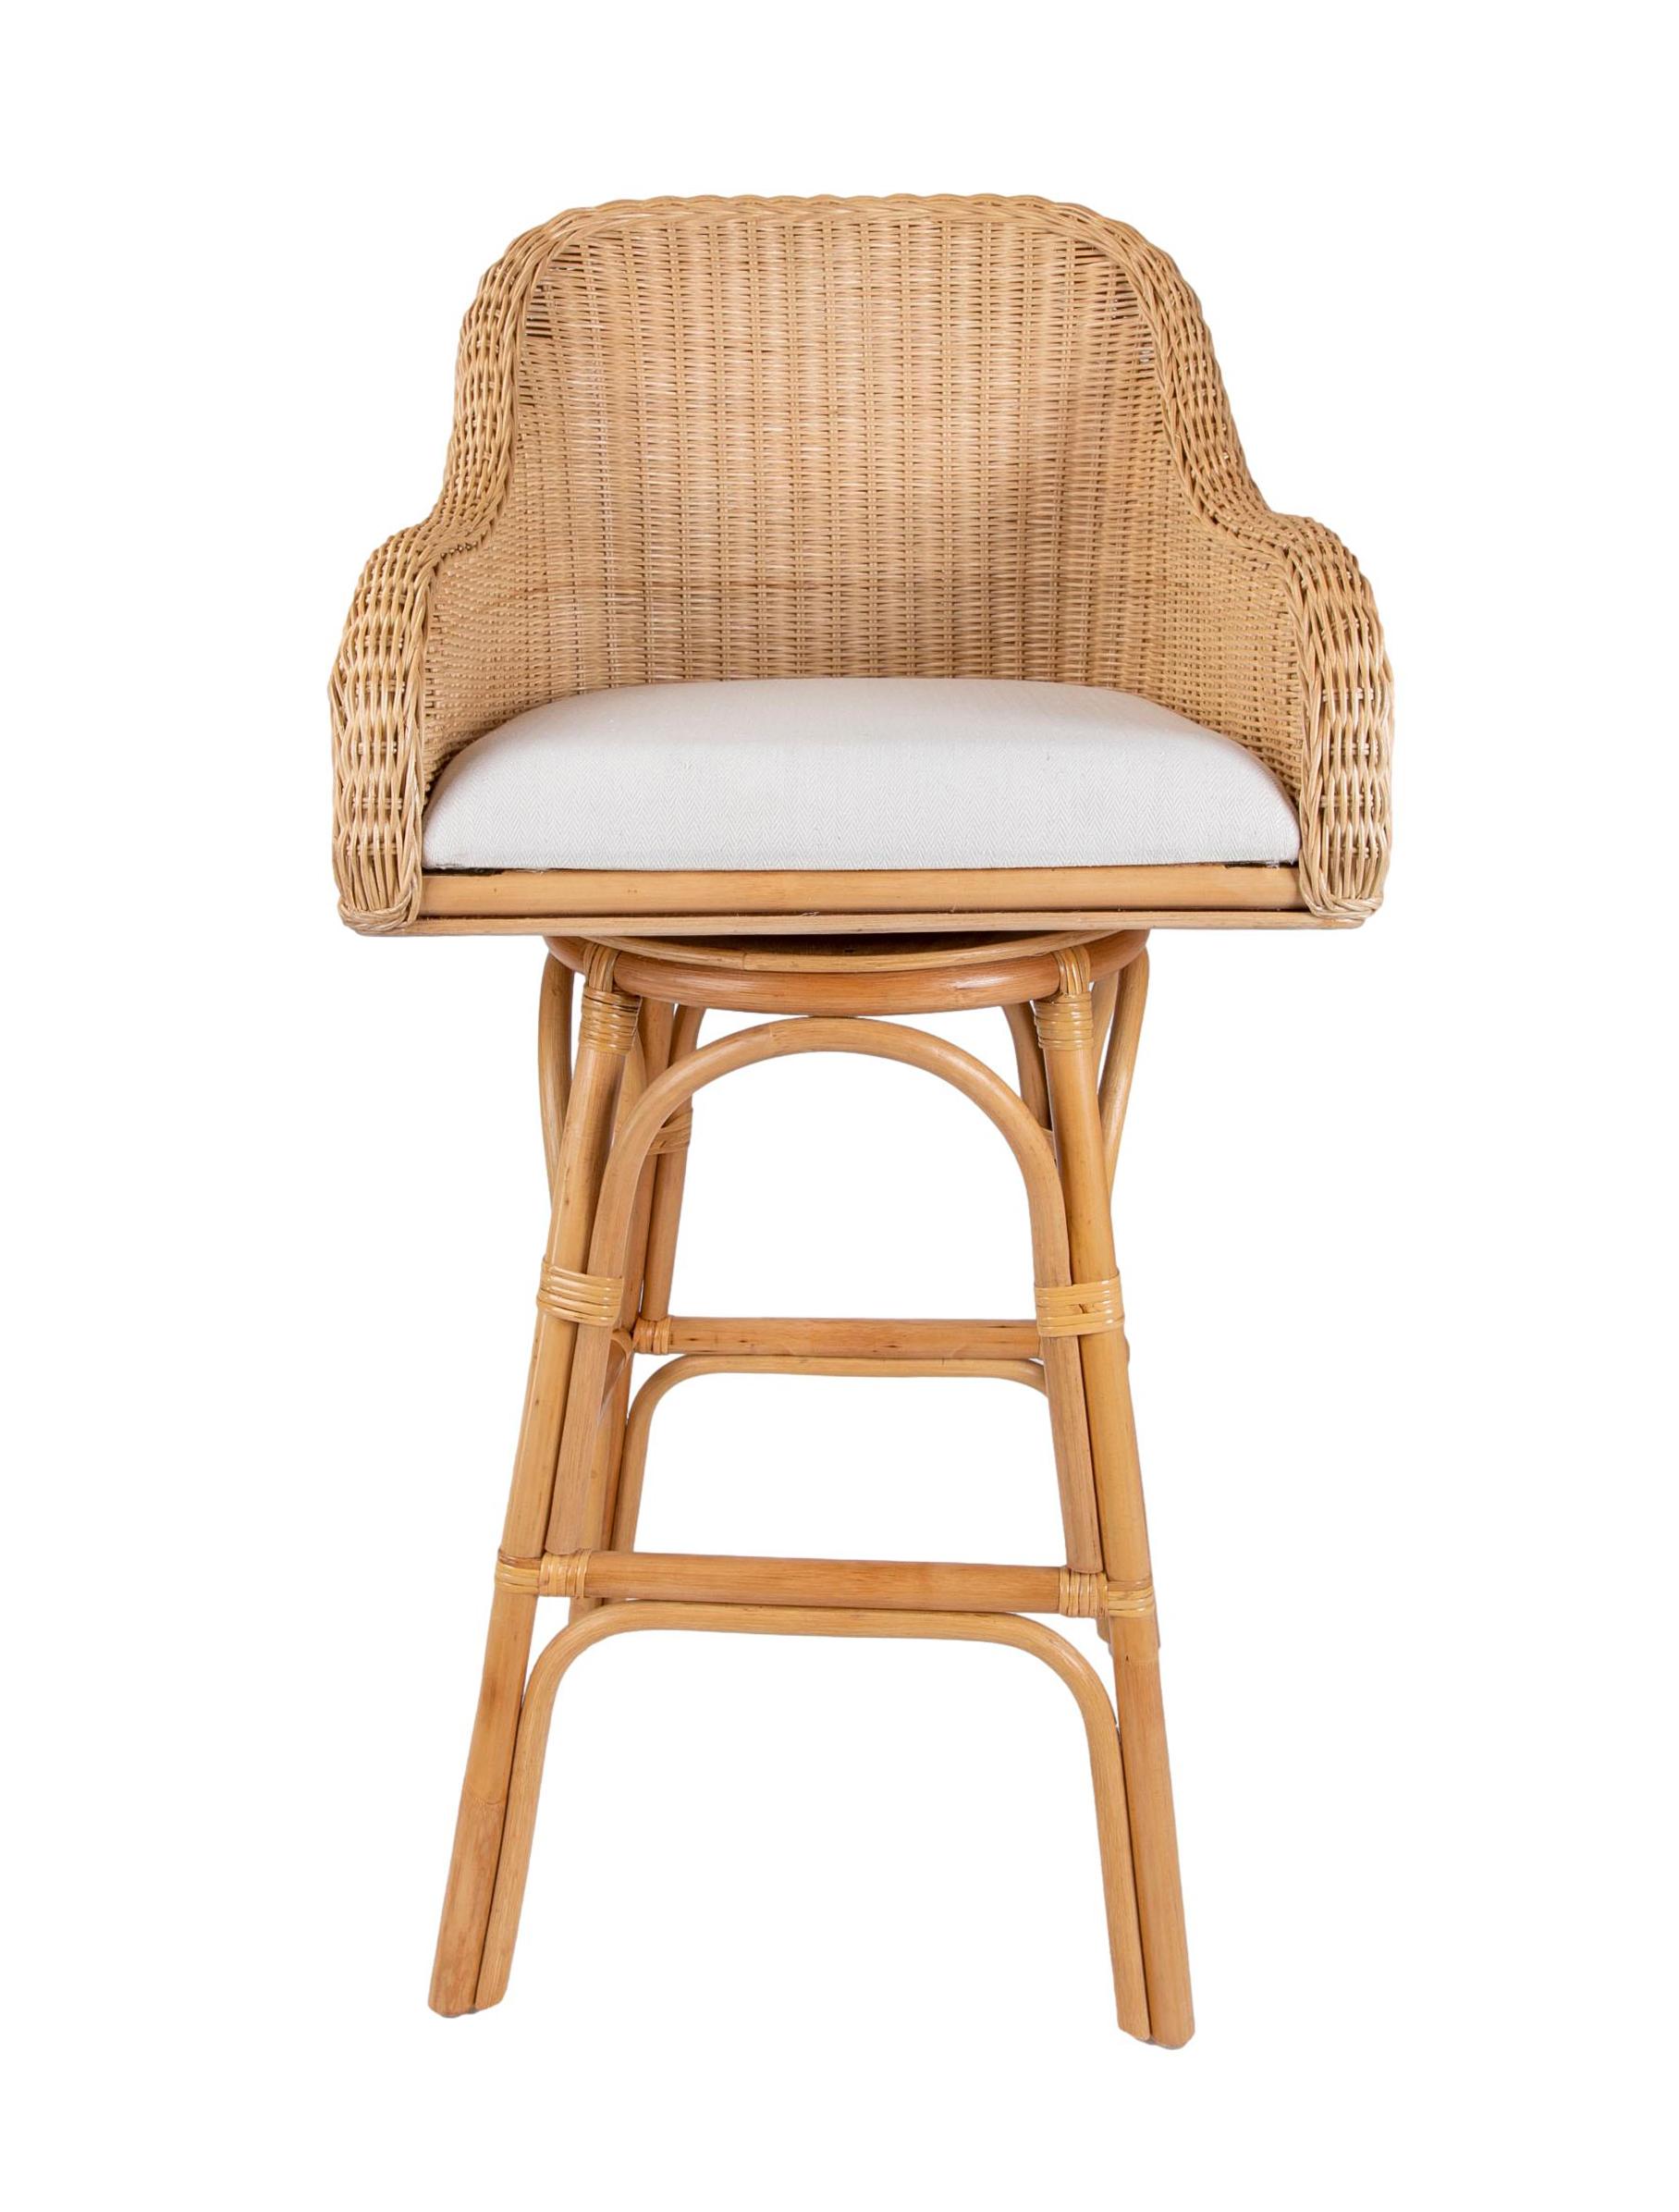 Upholstered Rattan and Wicker Bar stool with Sideways Movement 4